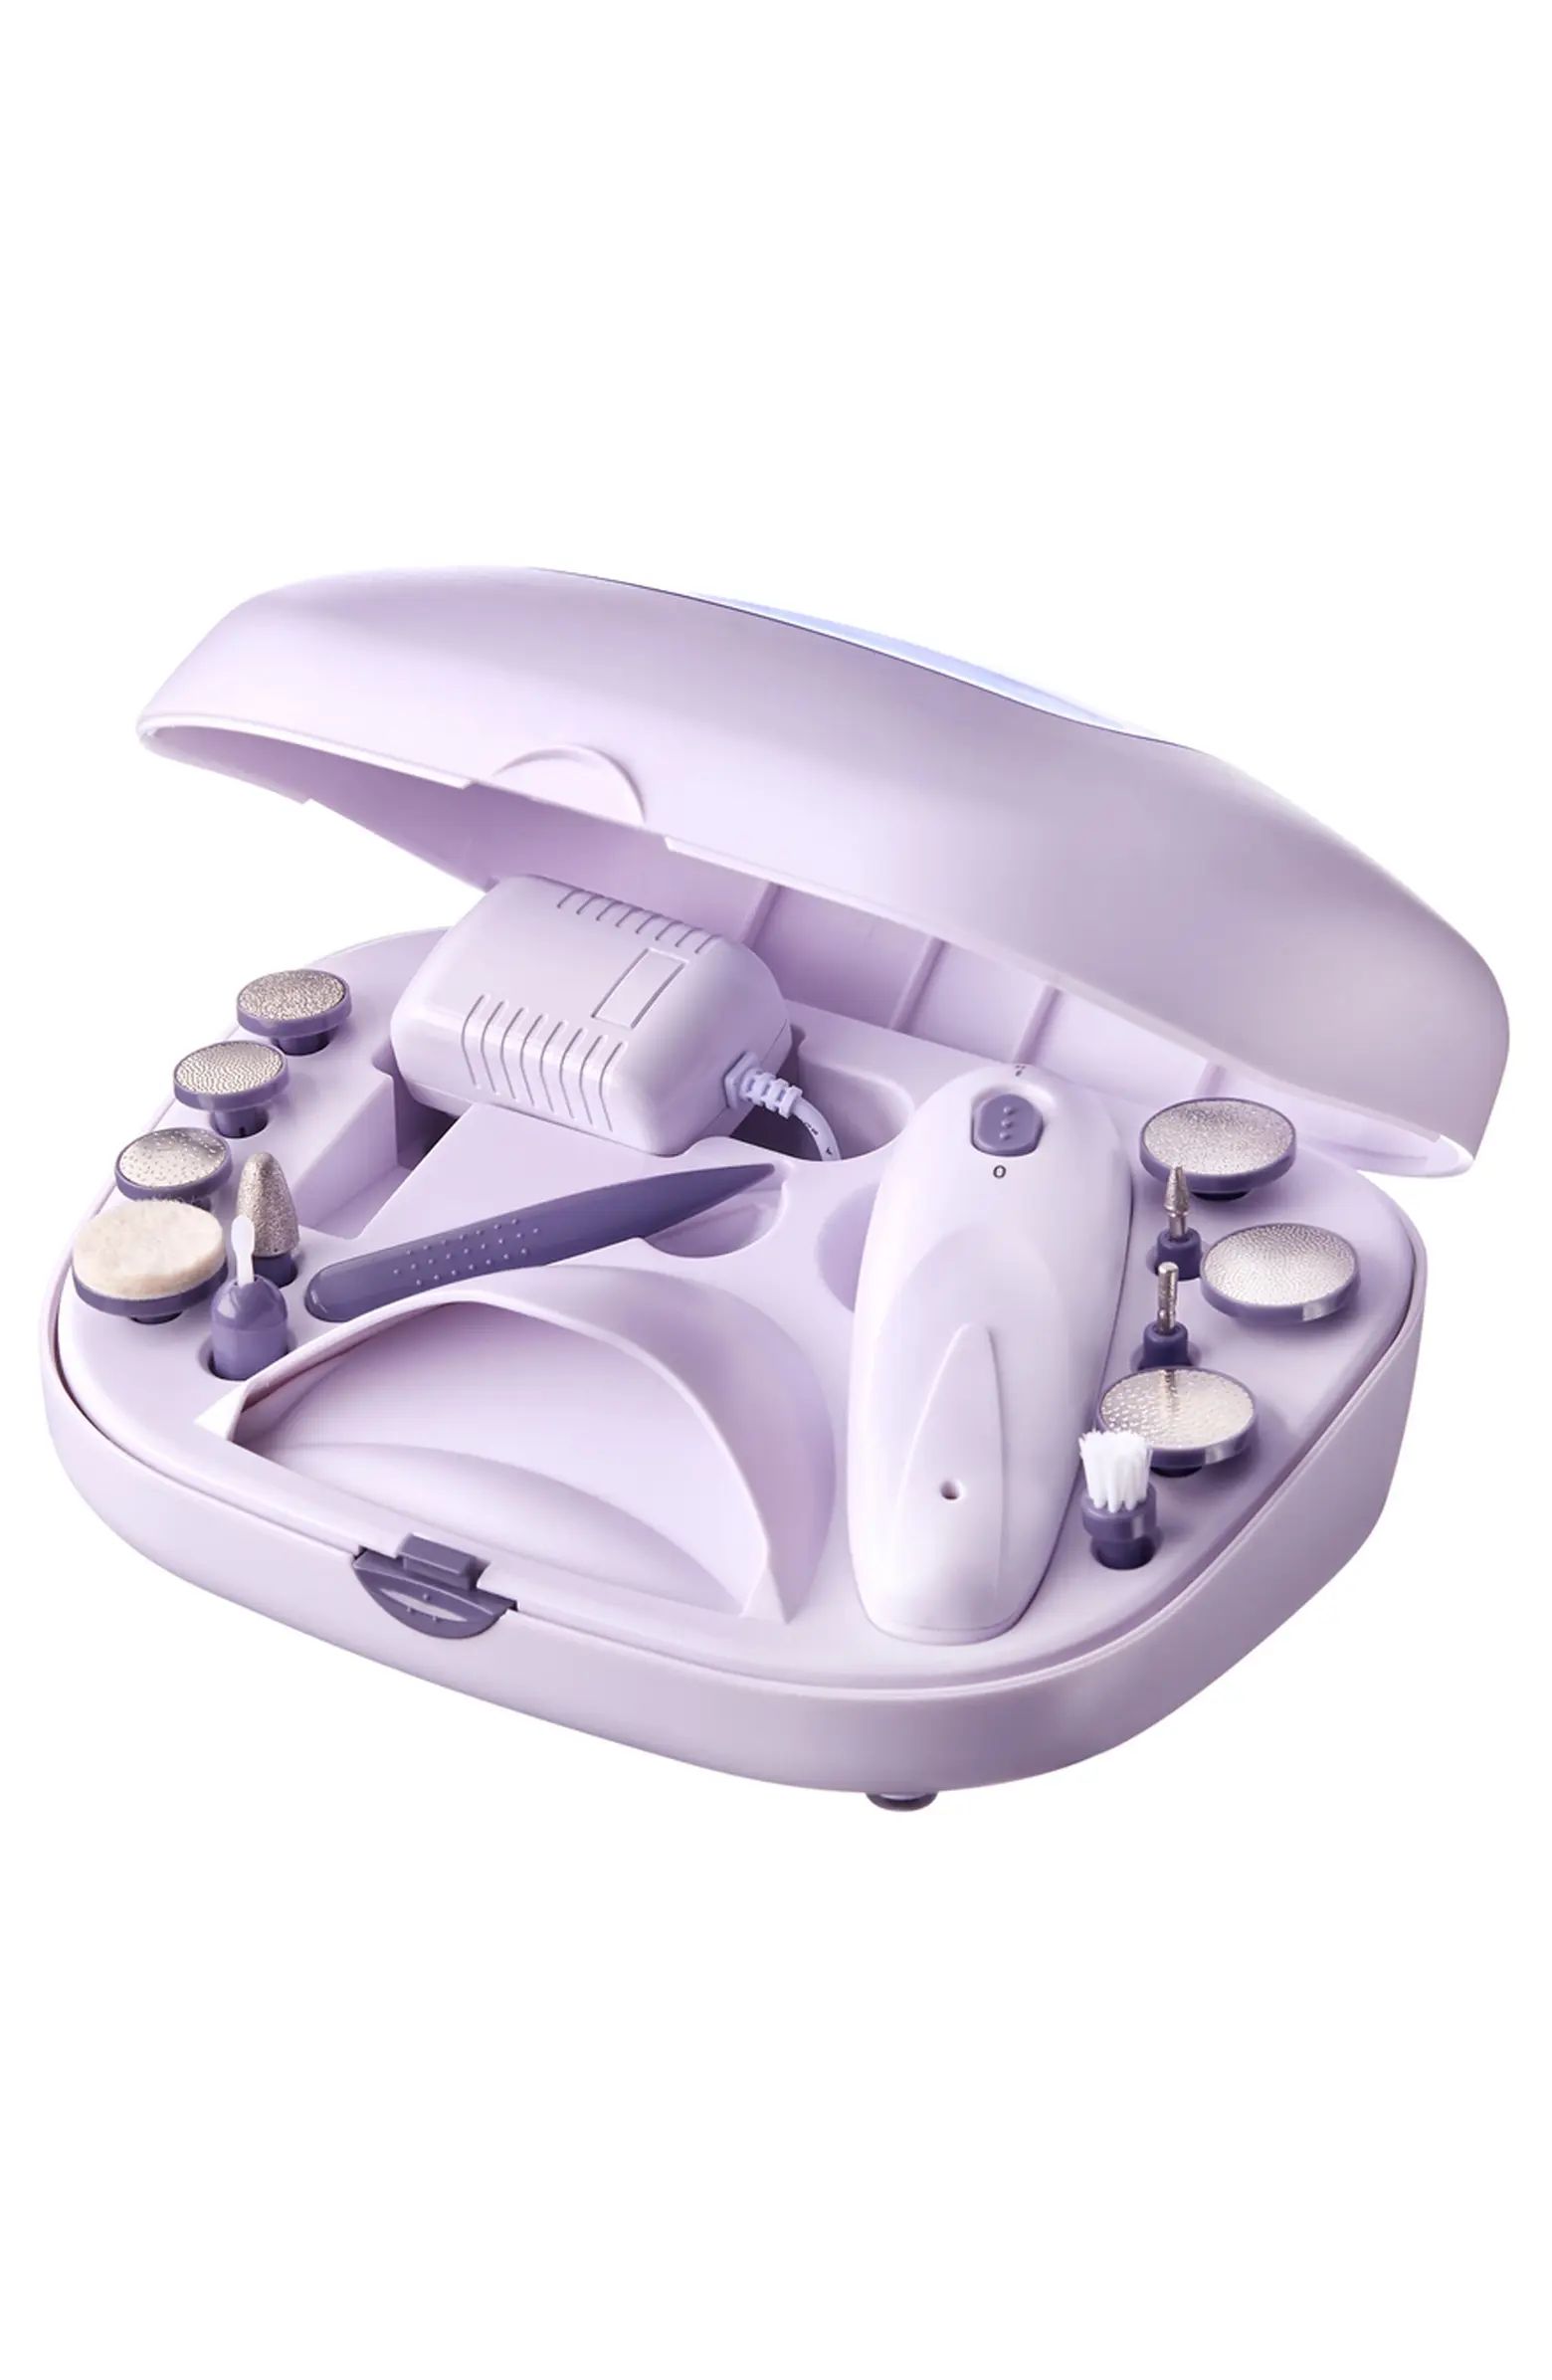 All-in-One Professional Power File & Nail Dryer | Nordstrom Rack